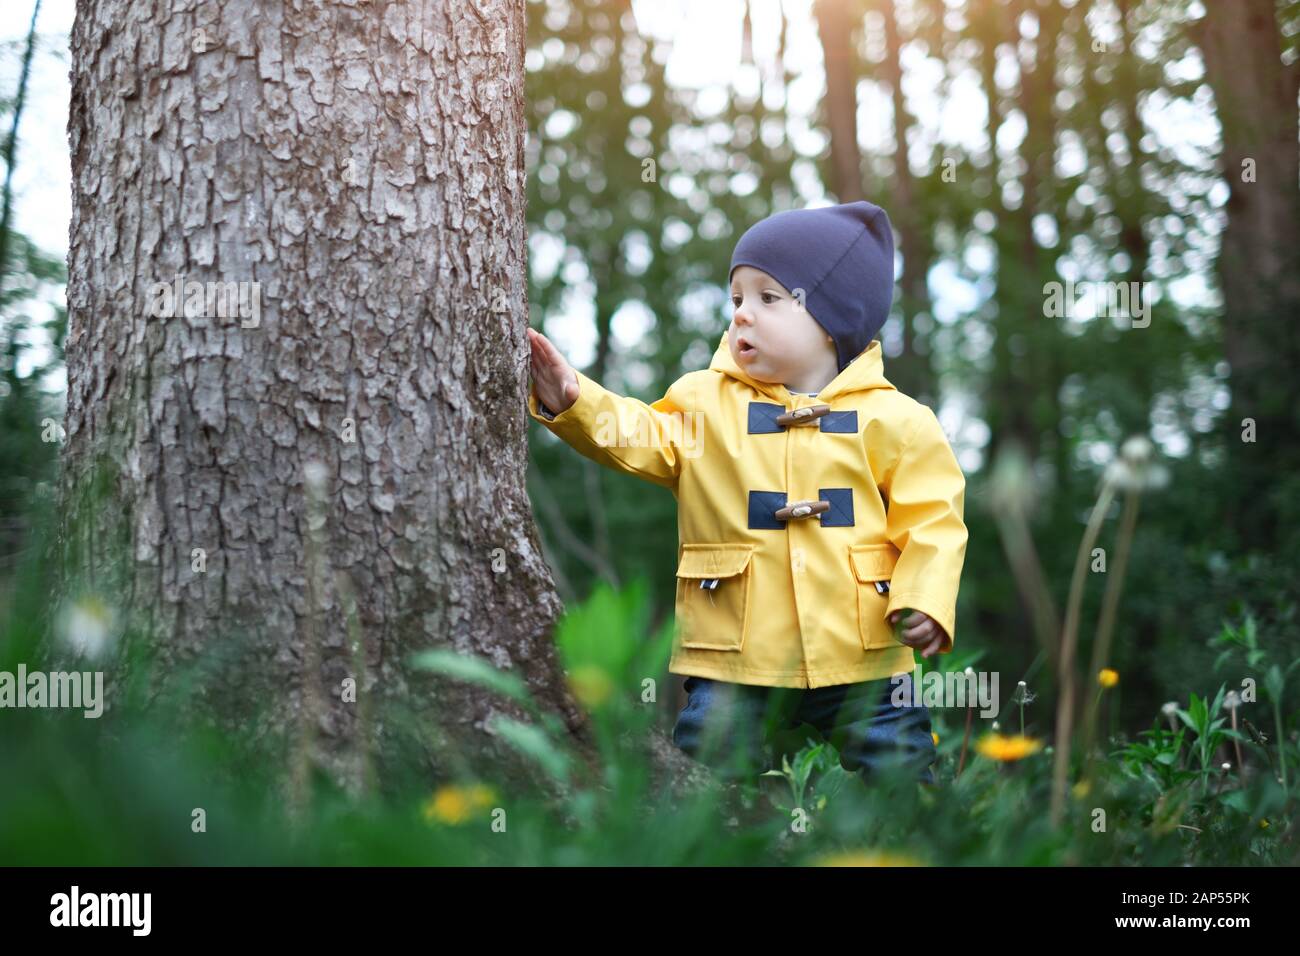 Kid in yellow jacket in forest near big tree Stock Photo